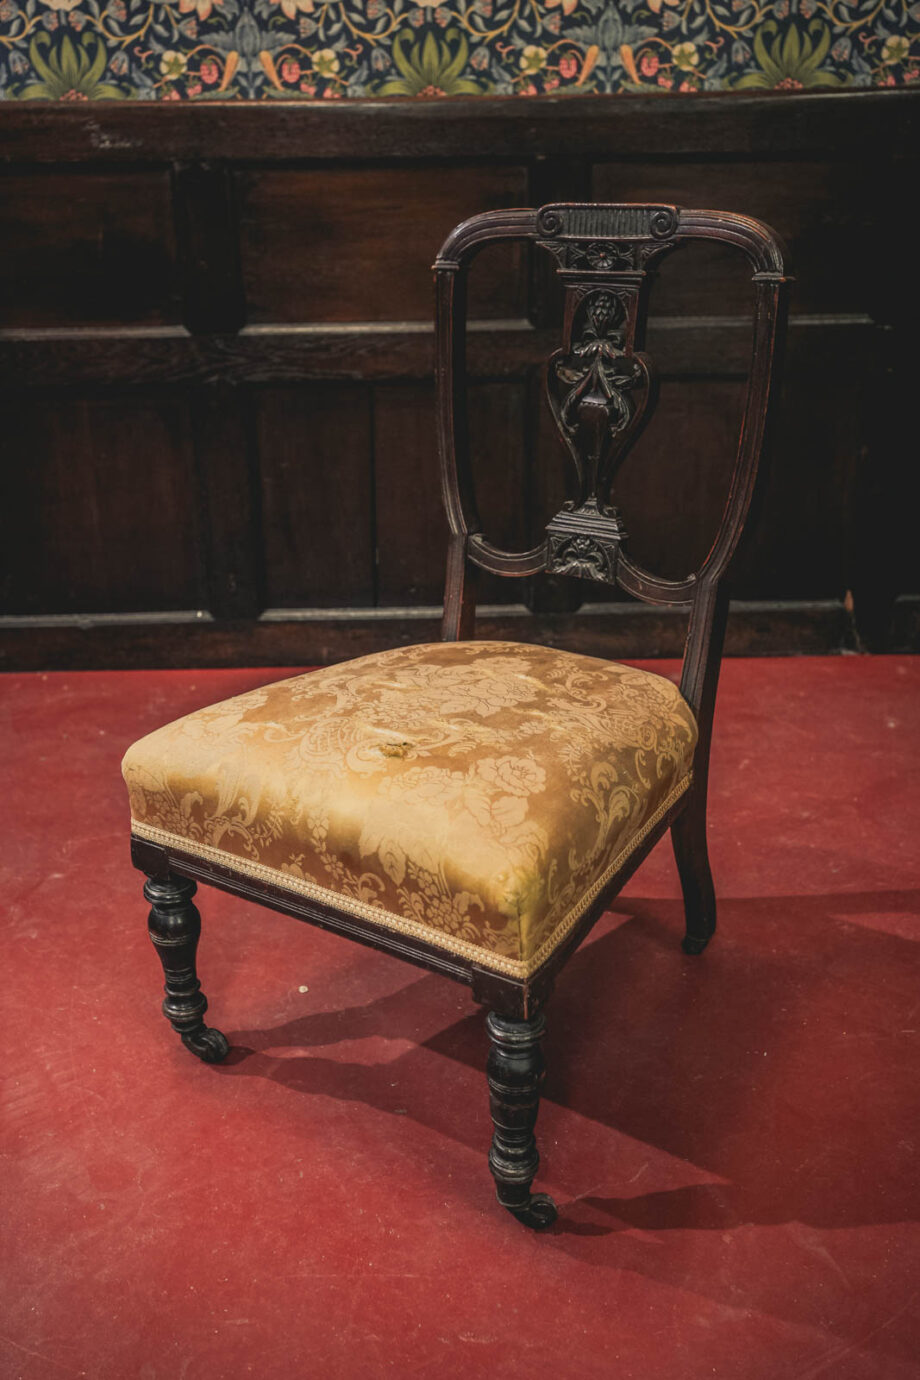 A wooden victorian chair with a gold upholstered seat